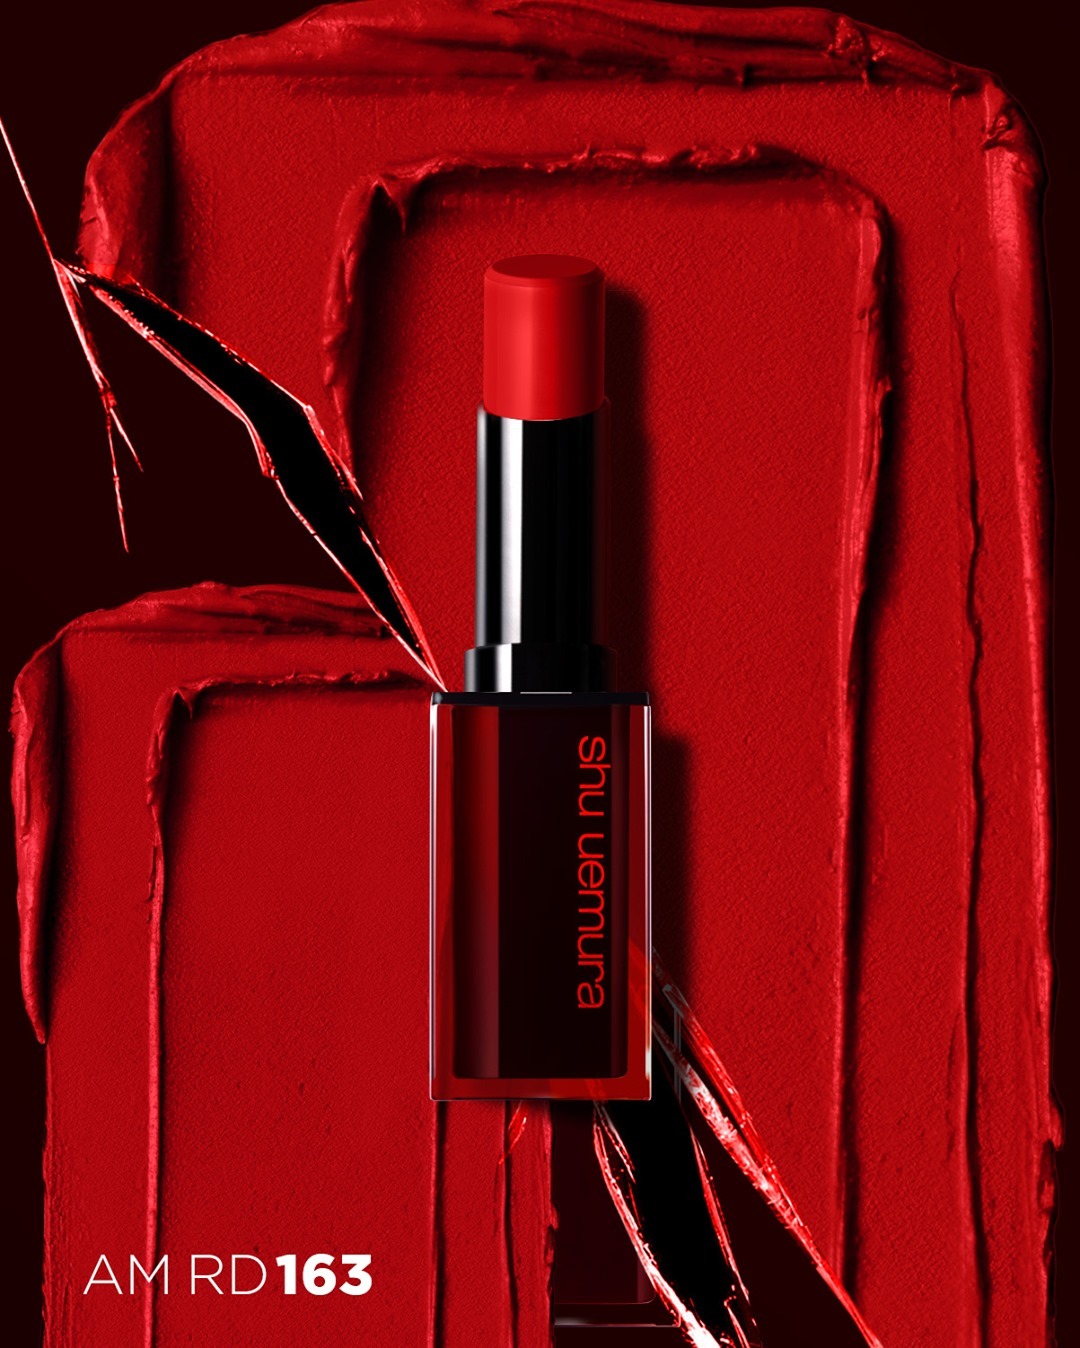 shu uemura - our signature rouge unlimited amplified red RD163 comes in a luxurious matte finish. 💄 ⁠
#shuuemura #shuartistry #rougeunlimited⁠